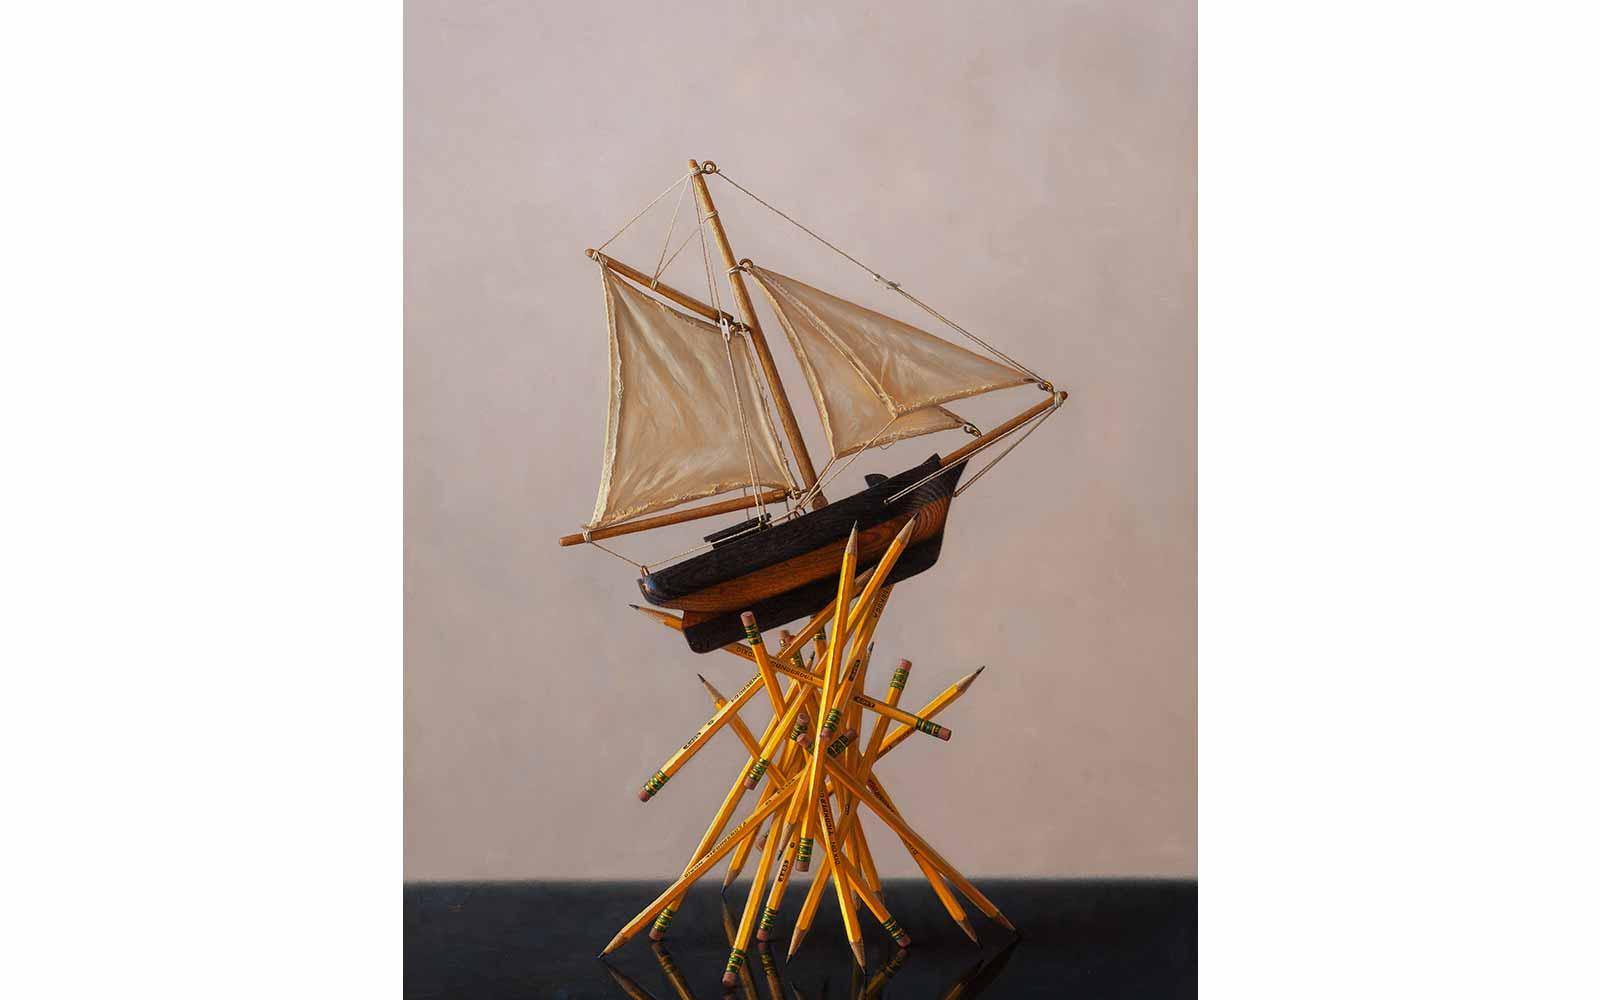 Scott Fraser, Pencil Wreck. Oil on board. 25.5 x 18 inches.